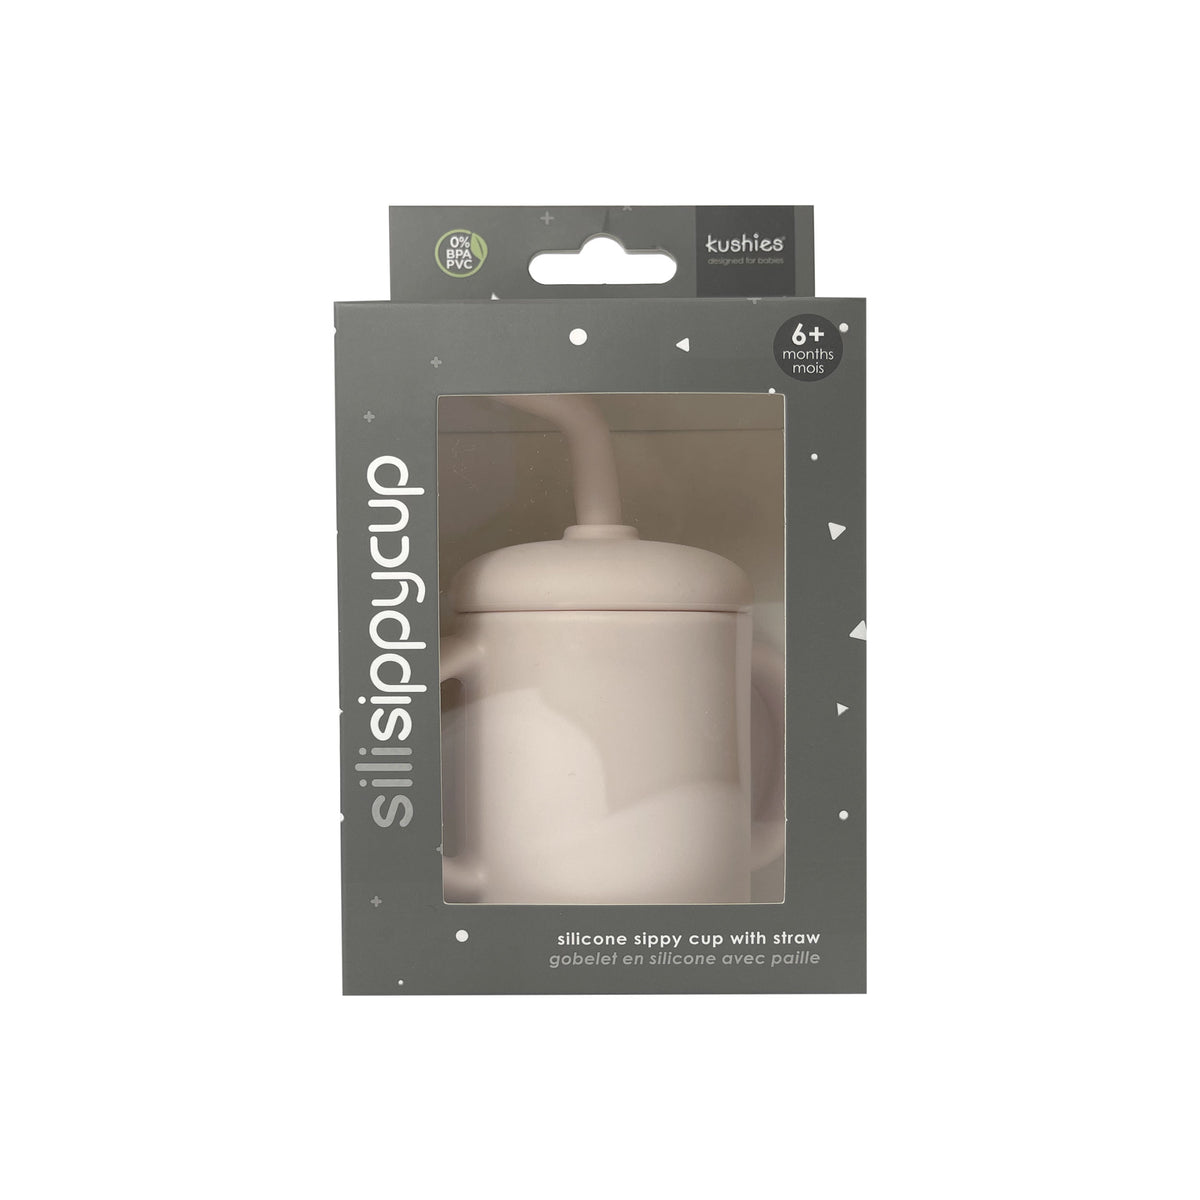 SiliSippy Cup | with Straw